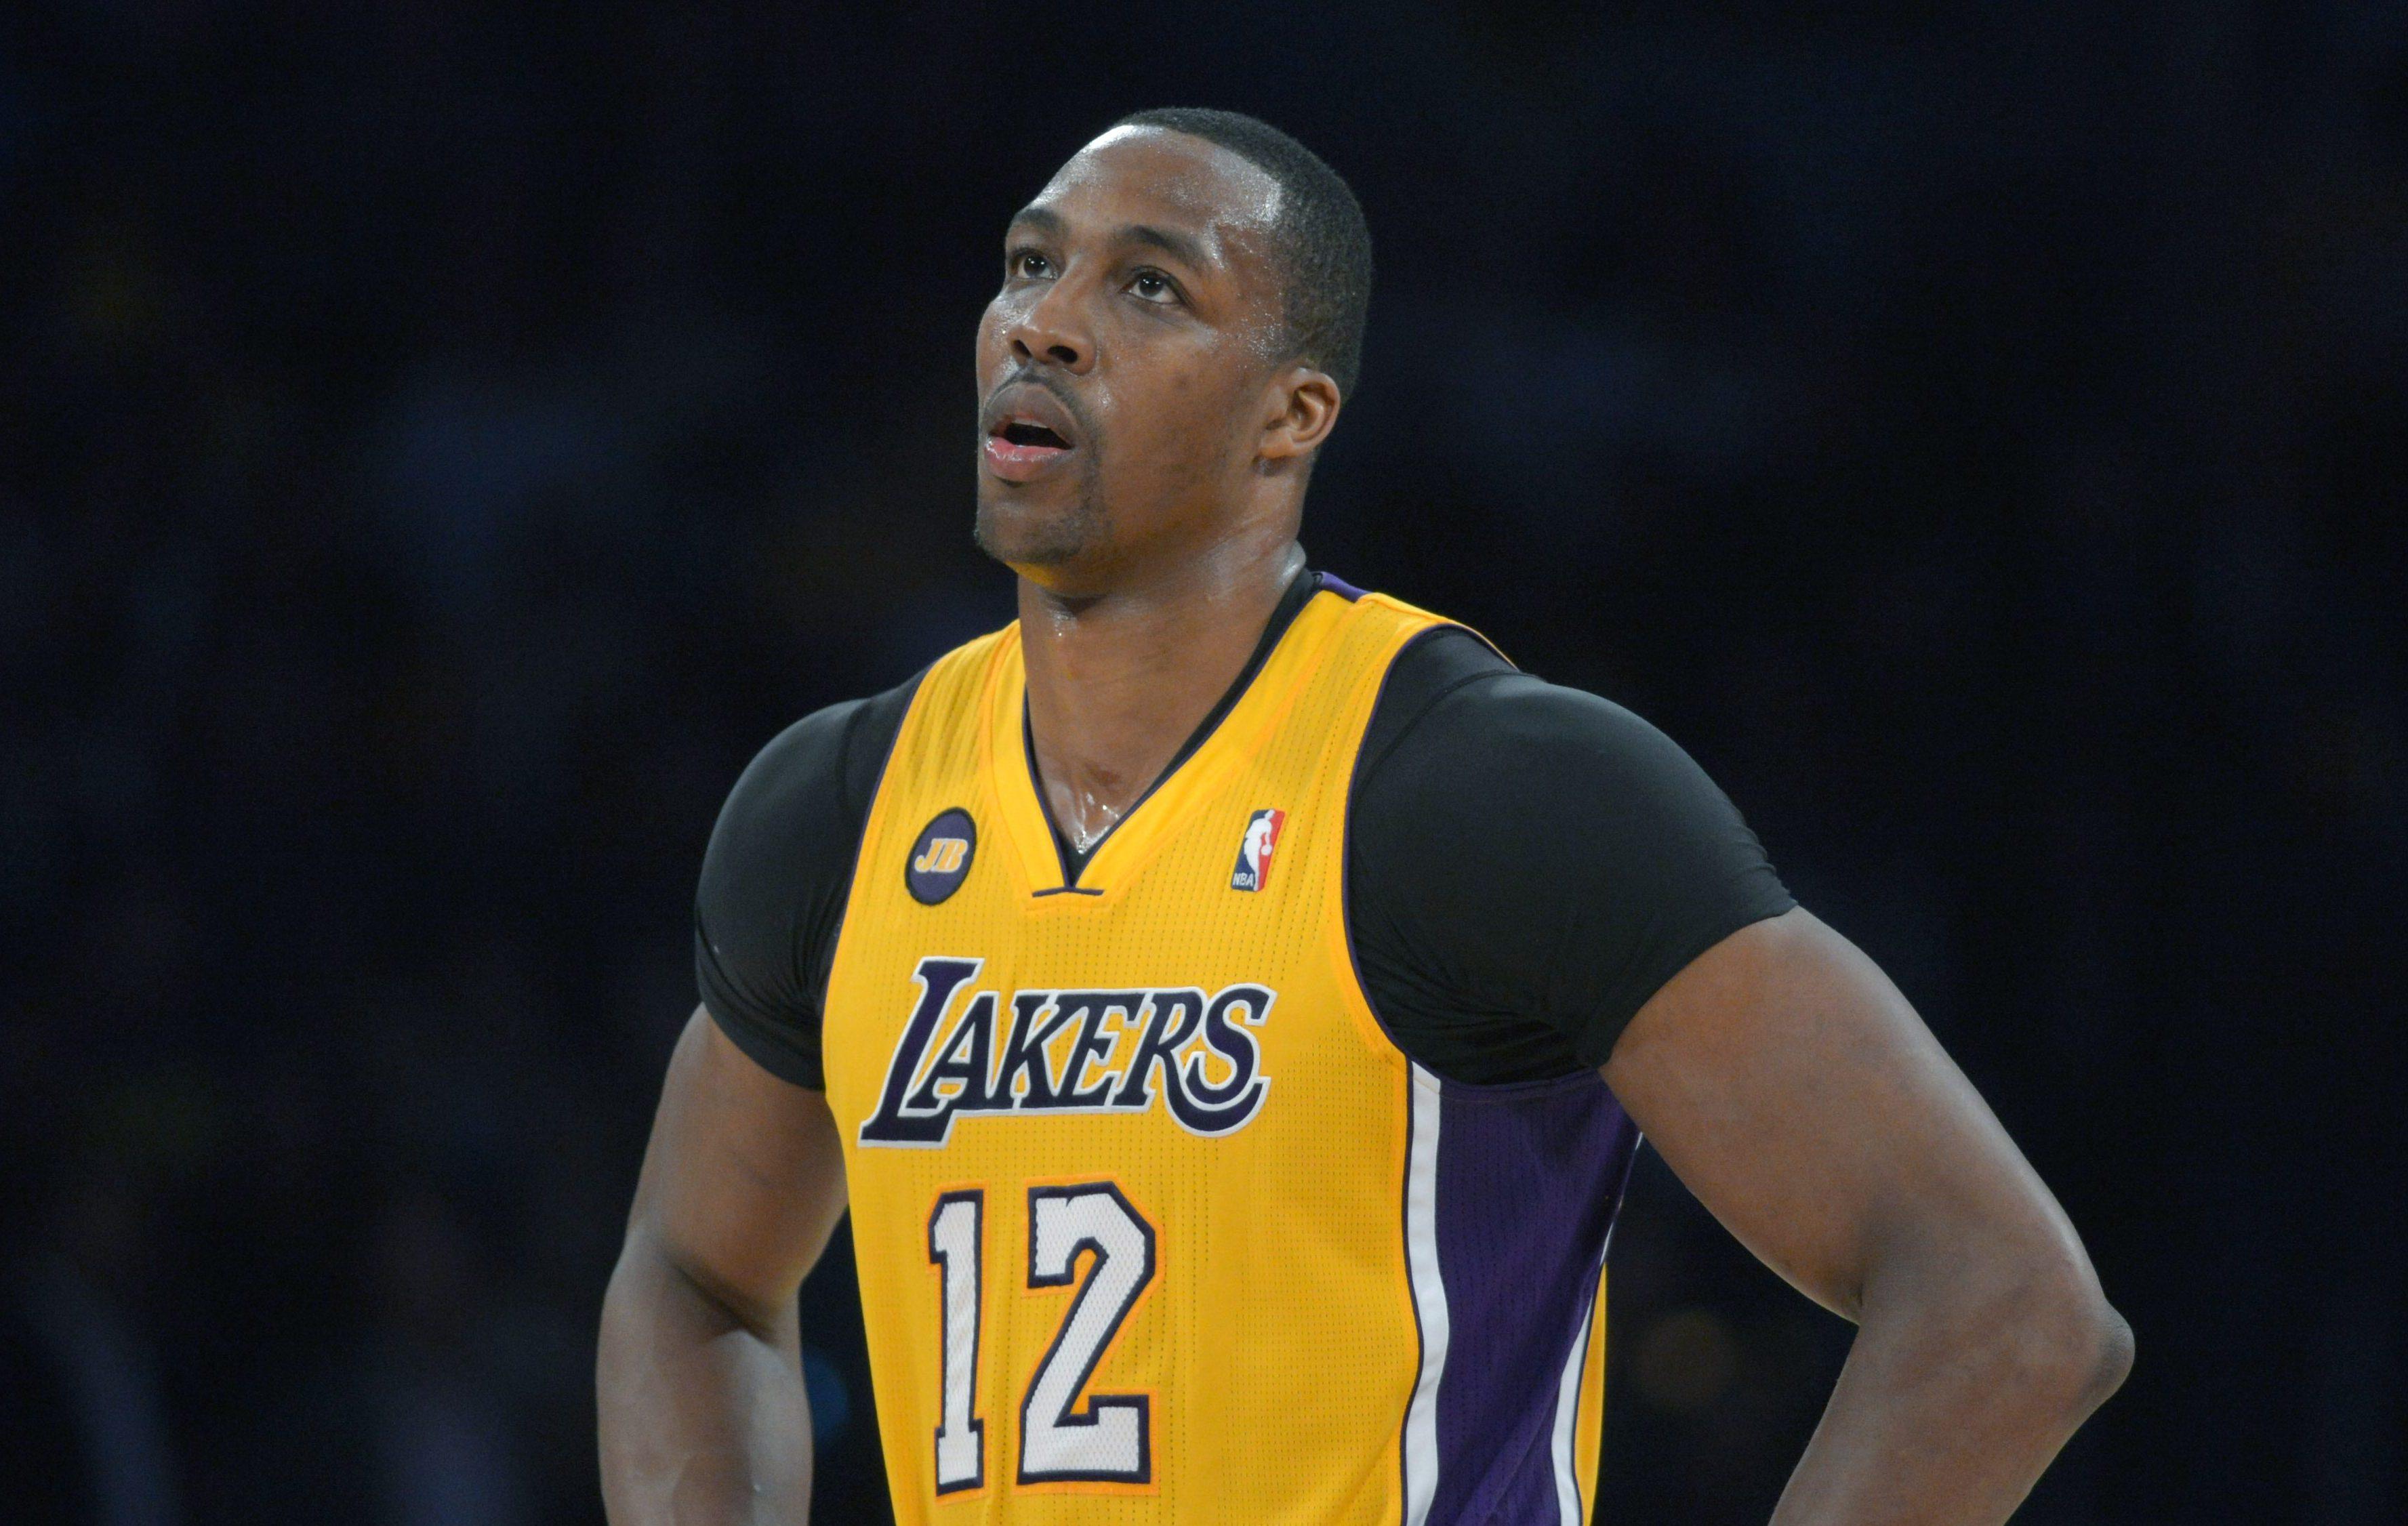 NBA: Lakers showing interest in Dwight Howard, and Twitter